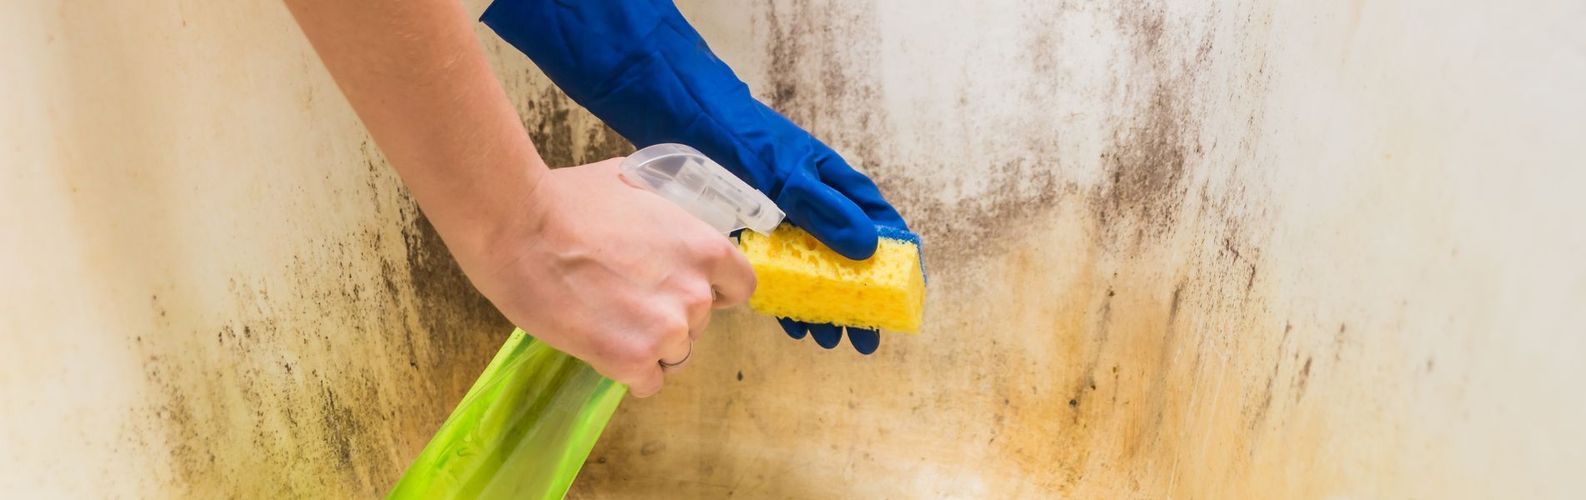 Hands with blue gloves and cleaning product cleaning mould from a wall